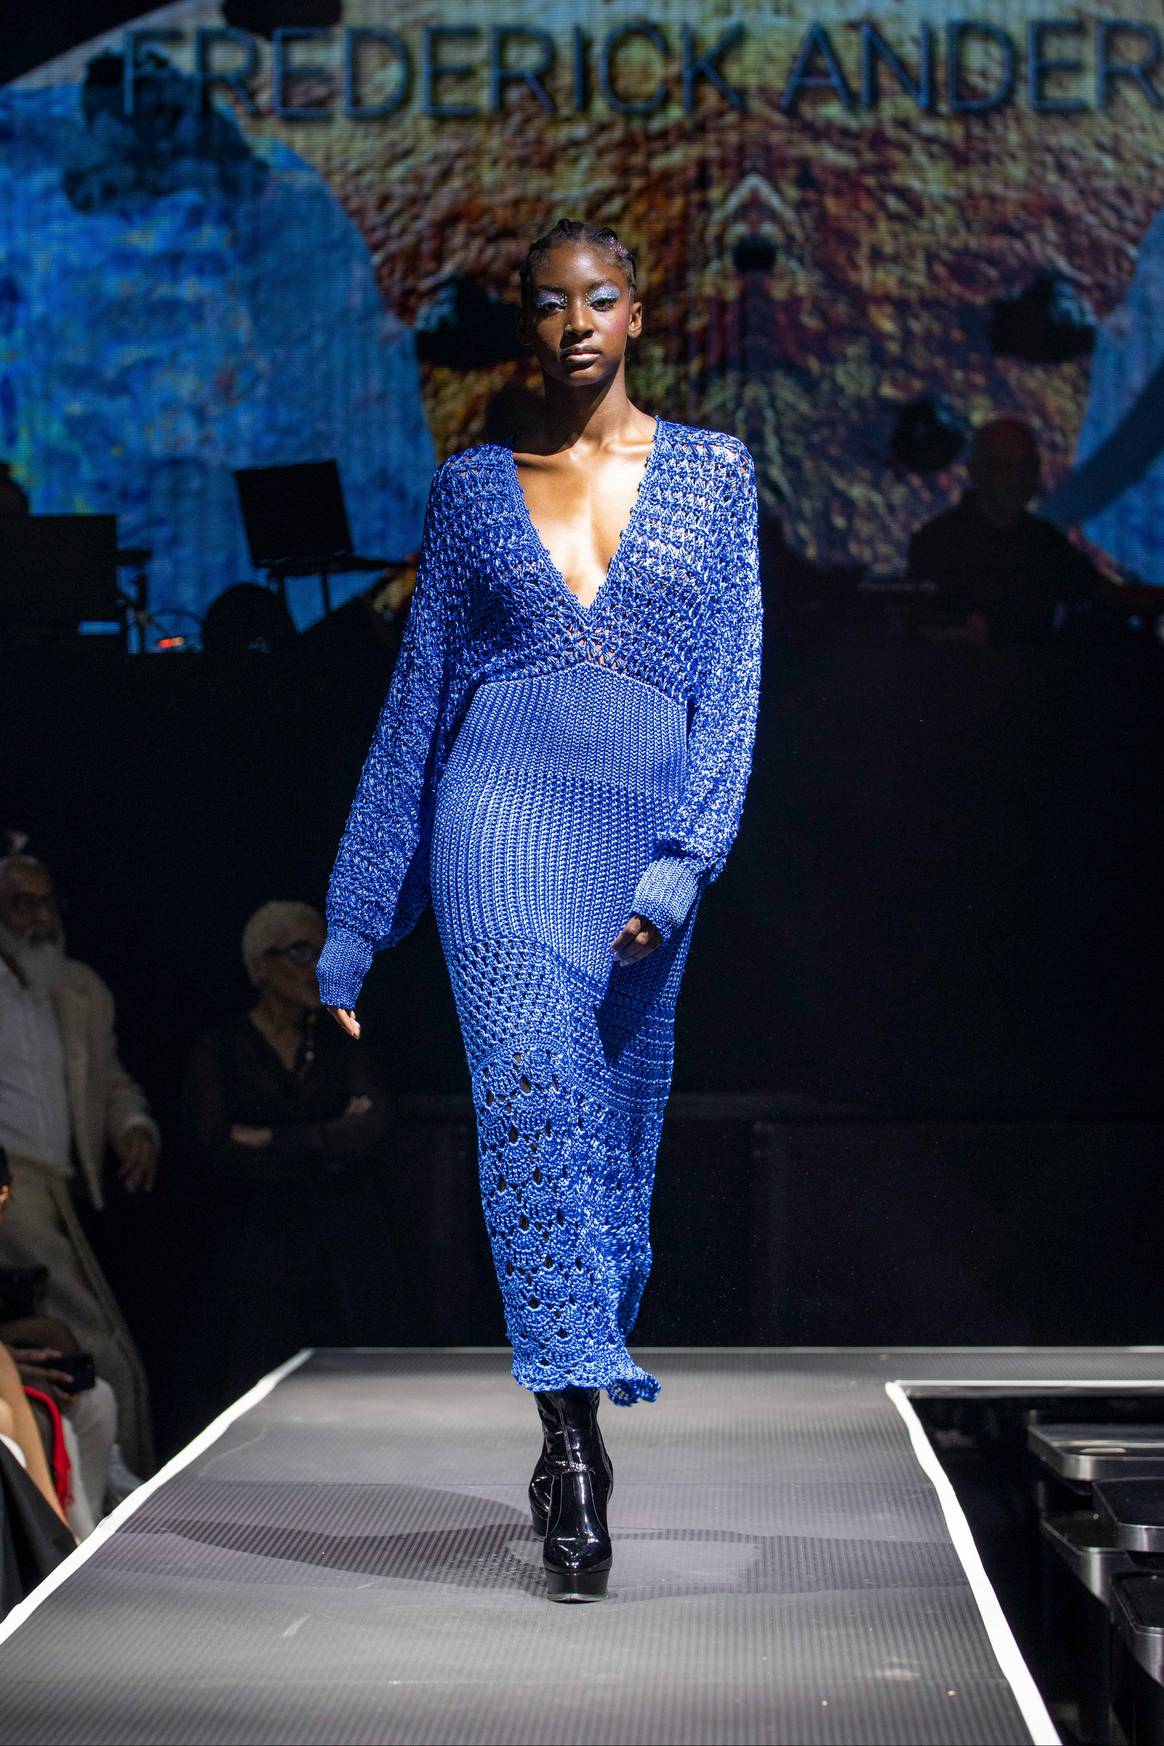 2019 Clothing Trends: Crochet Is a Resort Must-Have